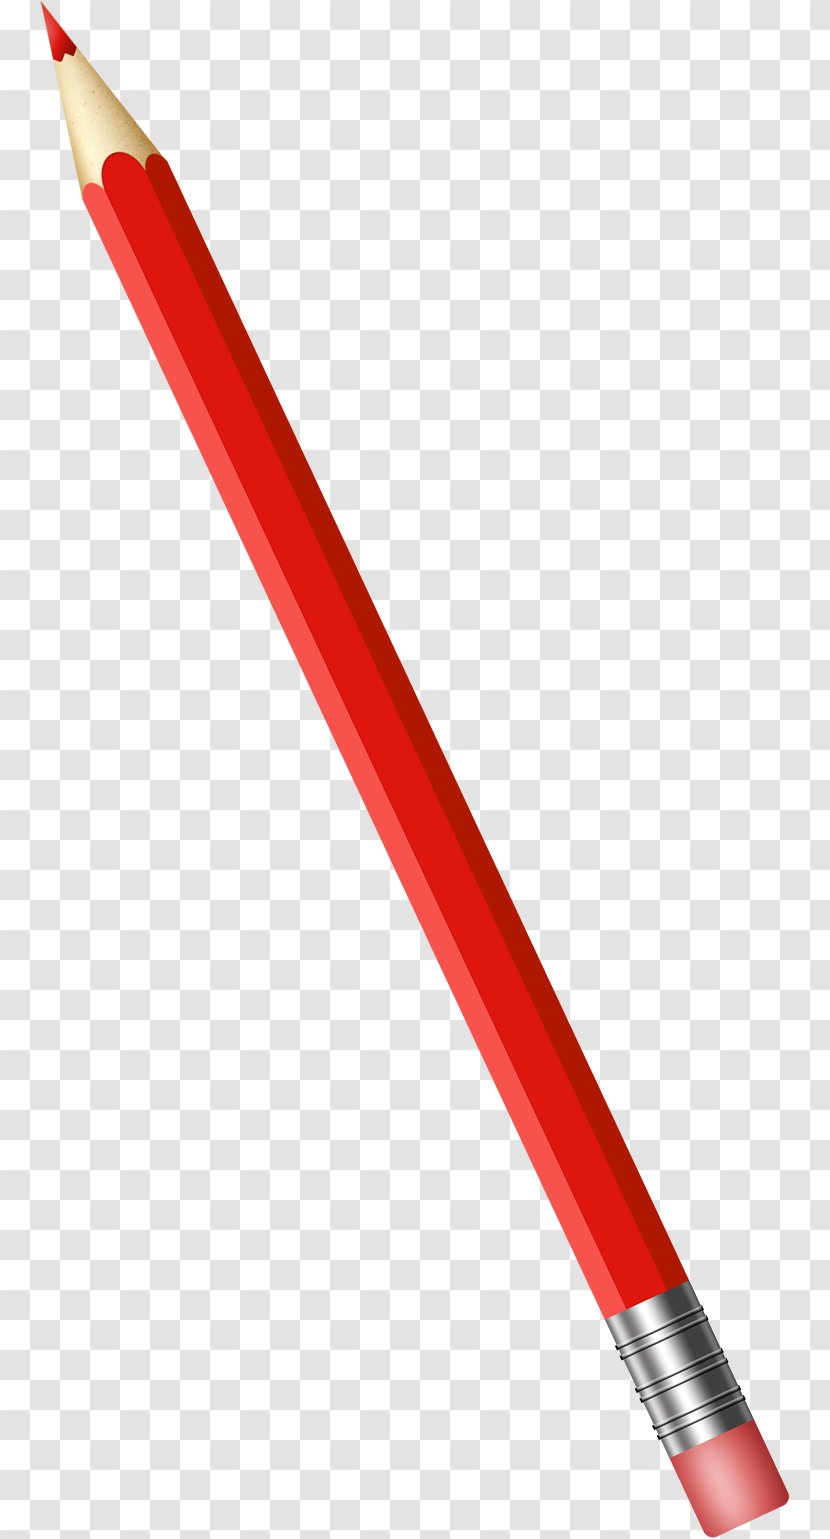 Red Pencil Sketch - Colored Transparent PNG